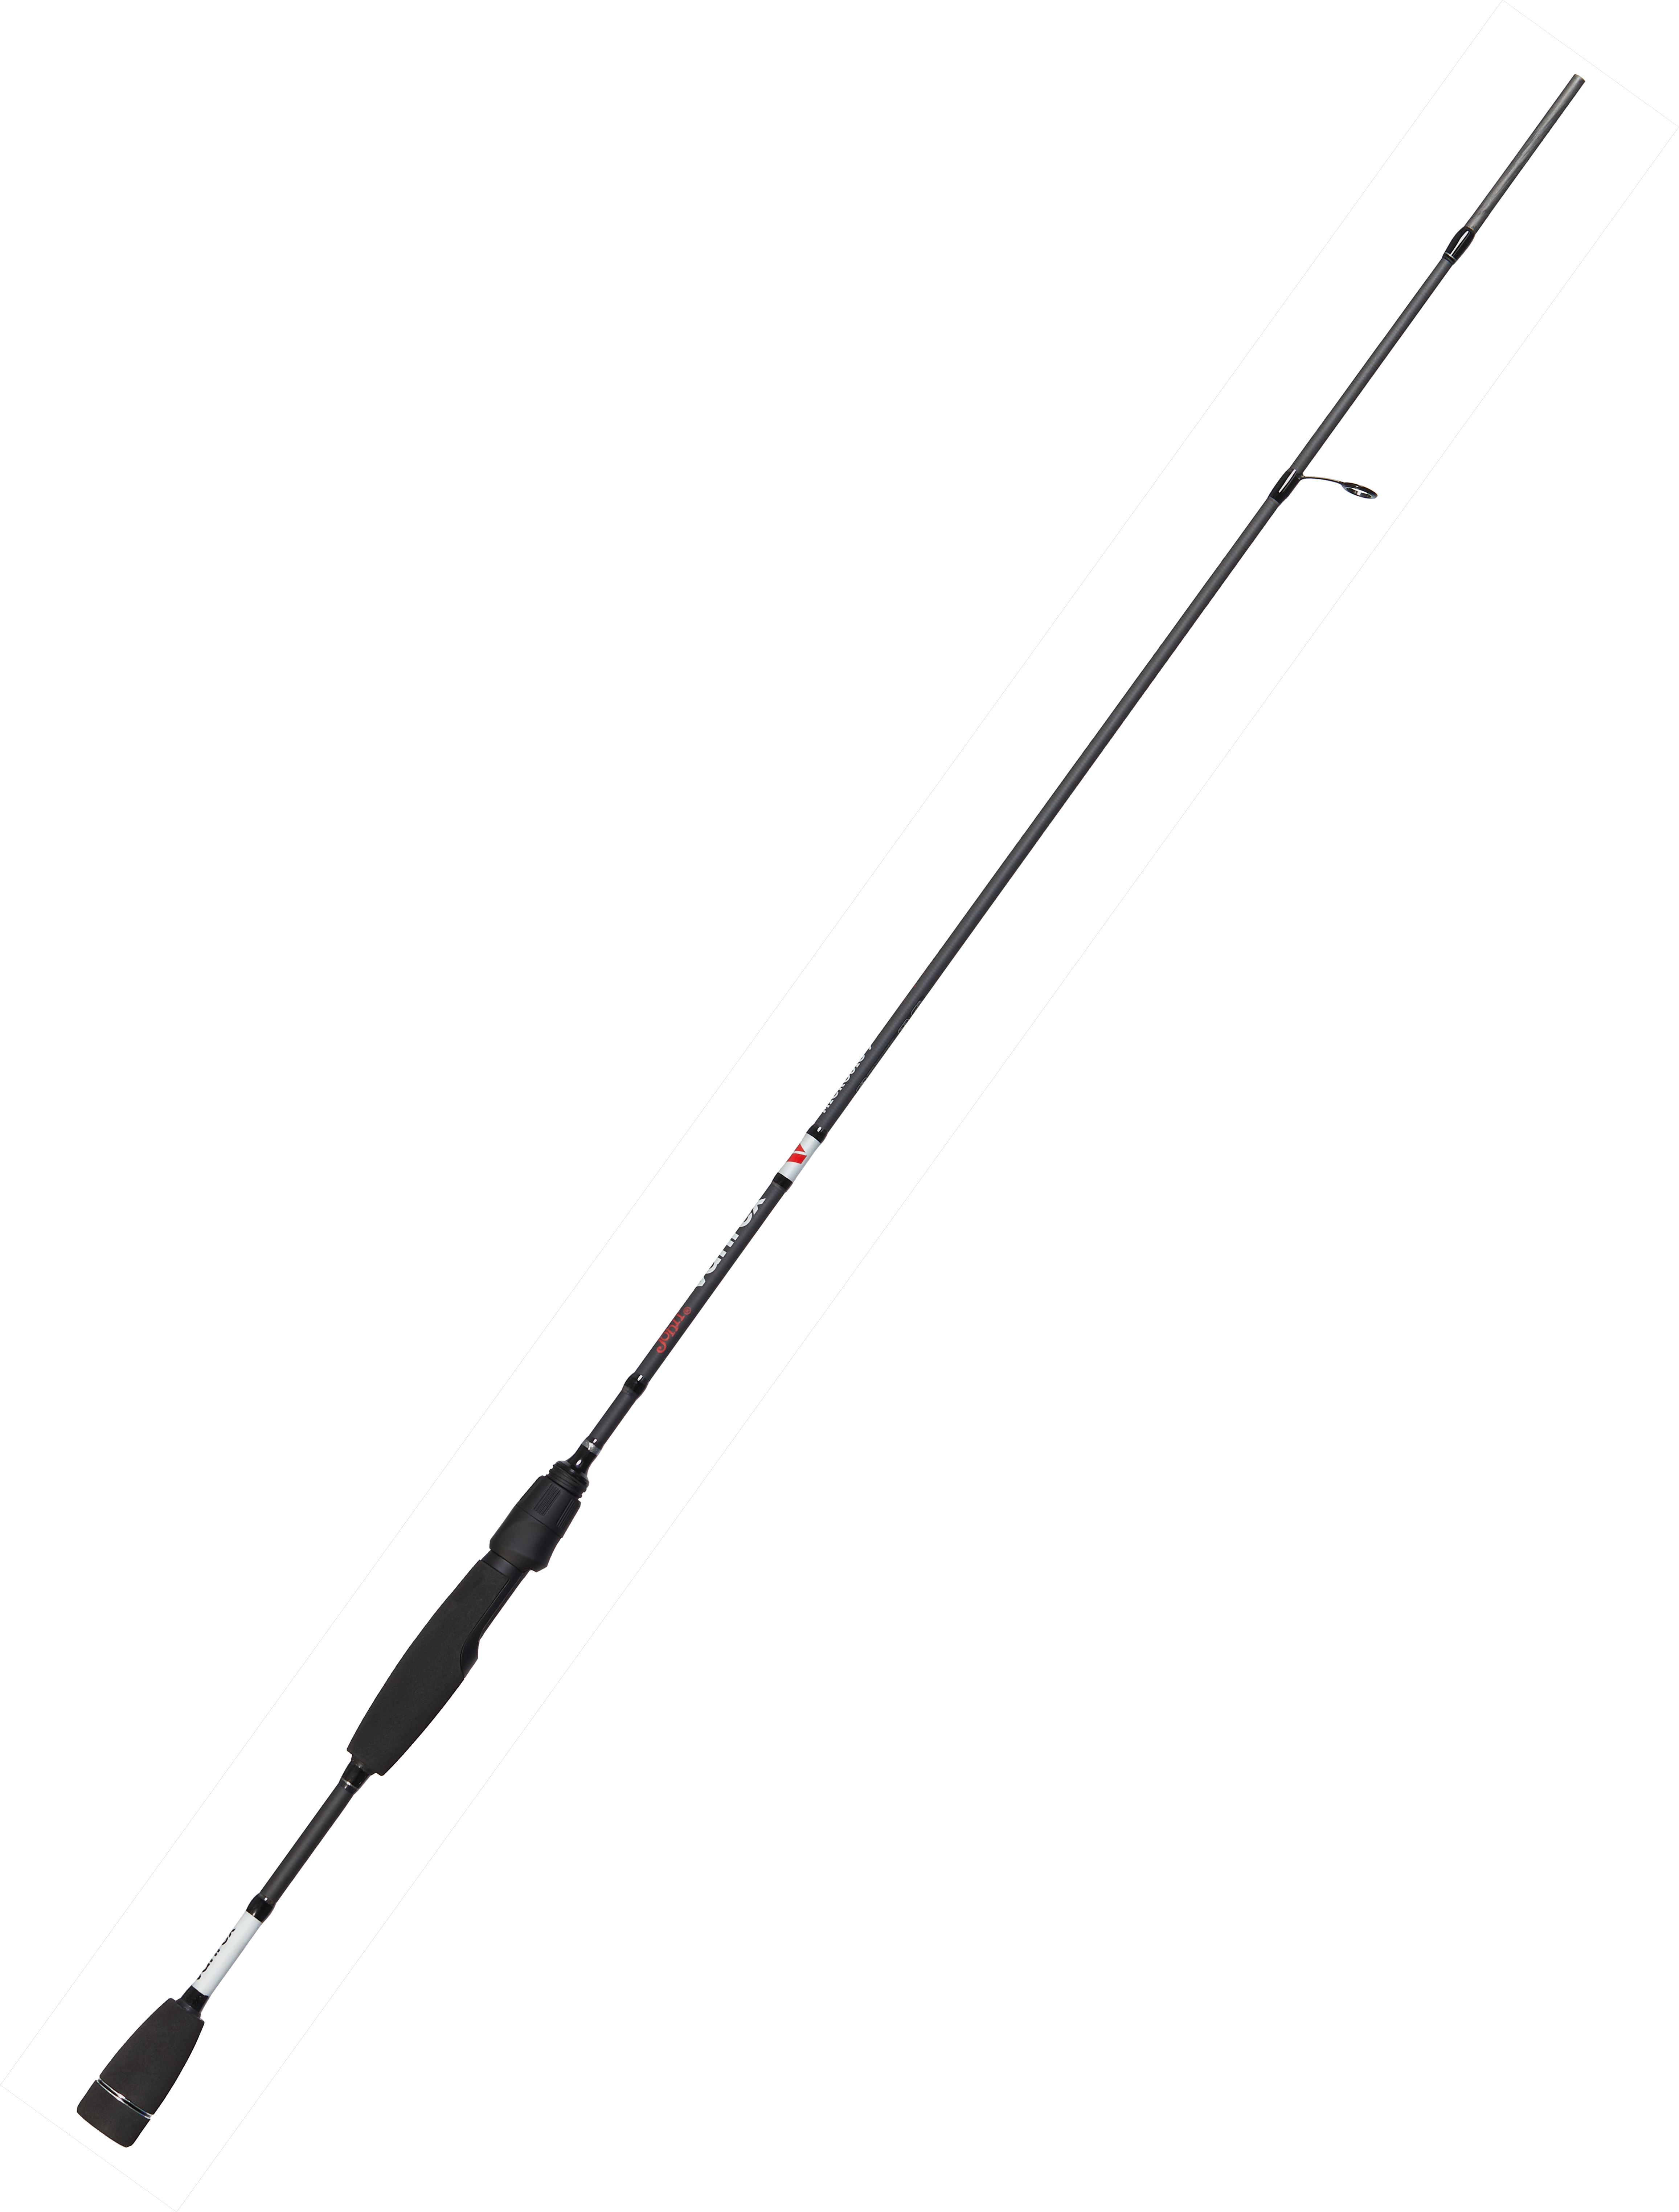 New Fenwick HMG Spinning Fishing Rod 1 Piece Multiple Sizes Power Action 